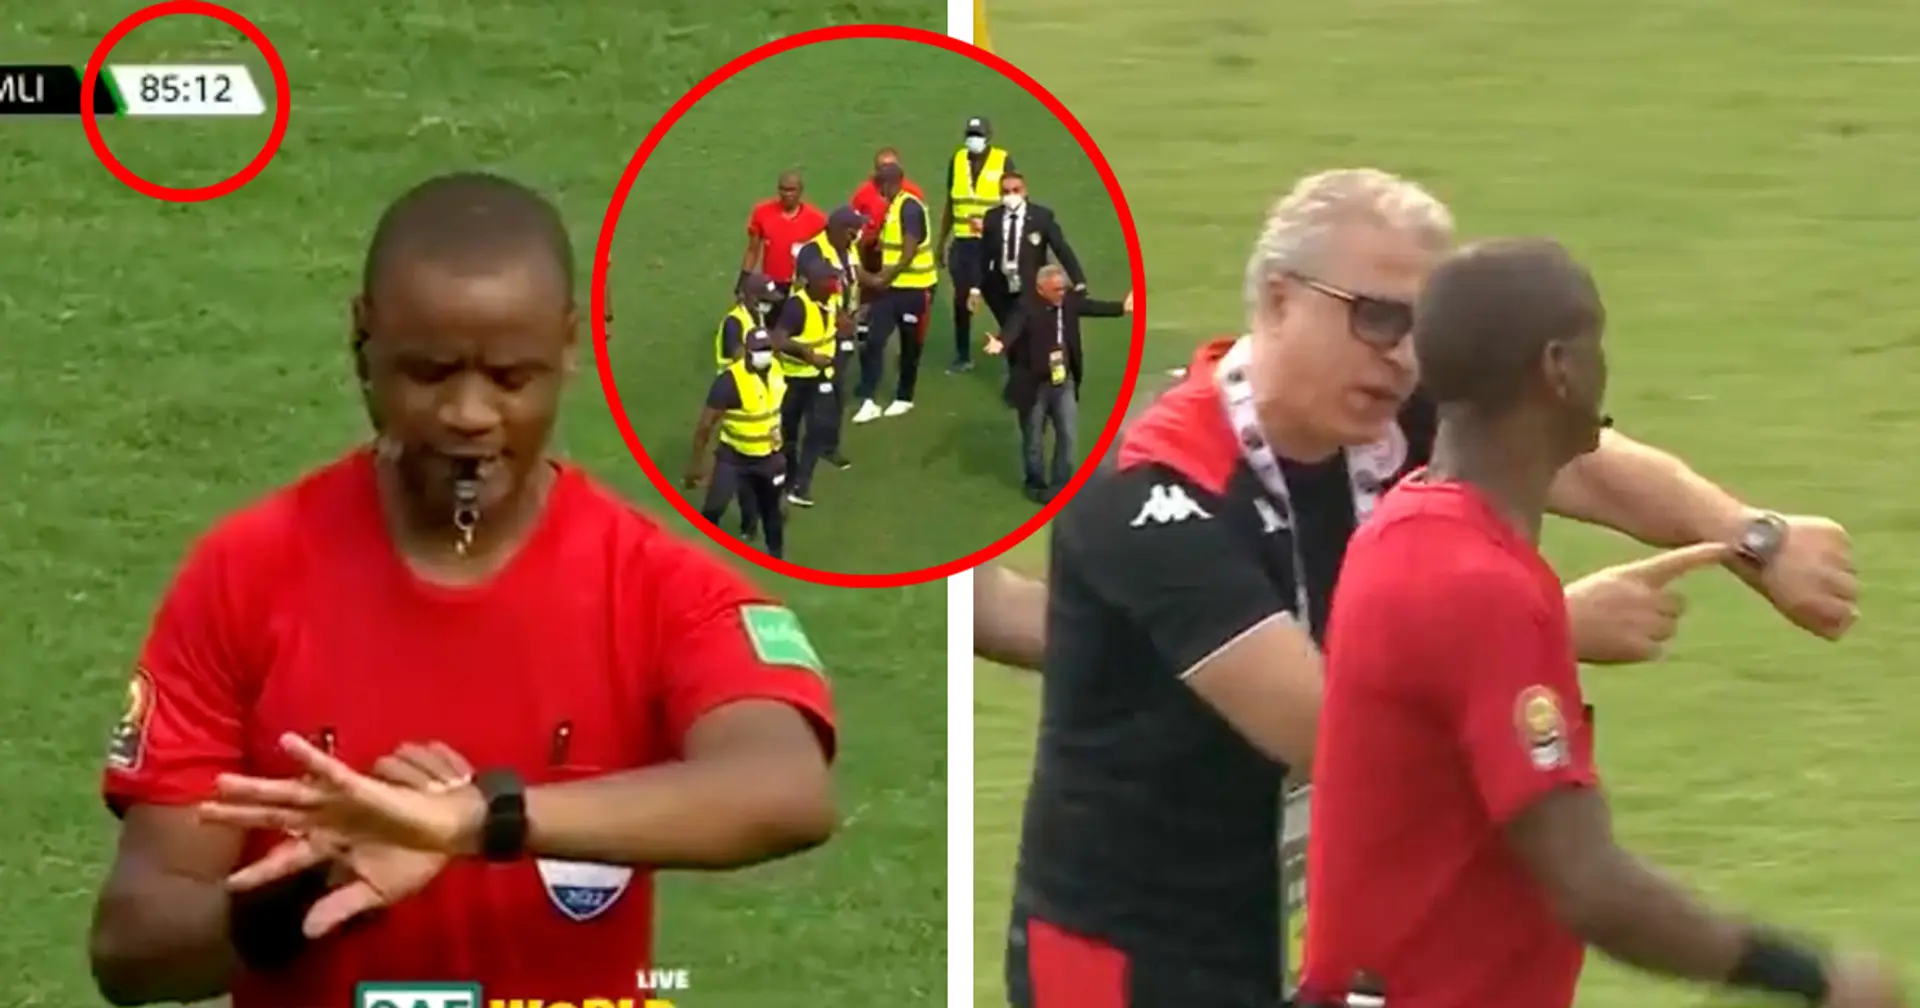 AFCON: Referee twice blows for full-time before the 90-minute mark with no added time in Tunisia-Mali match